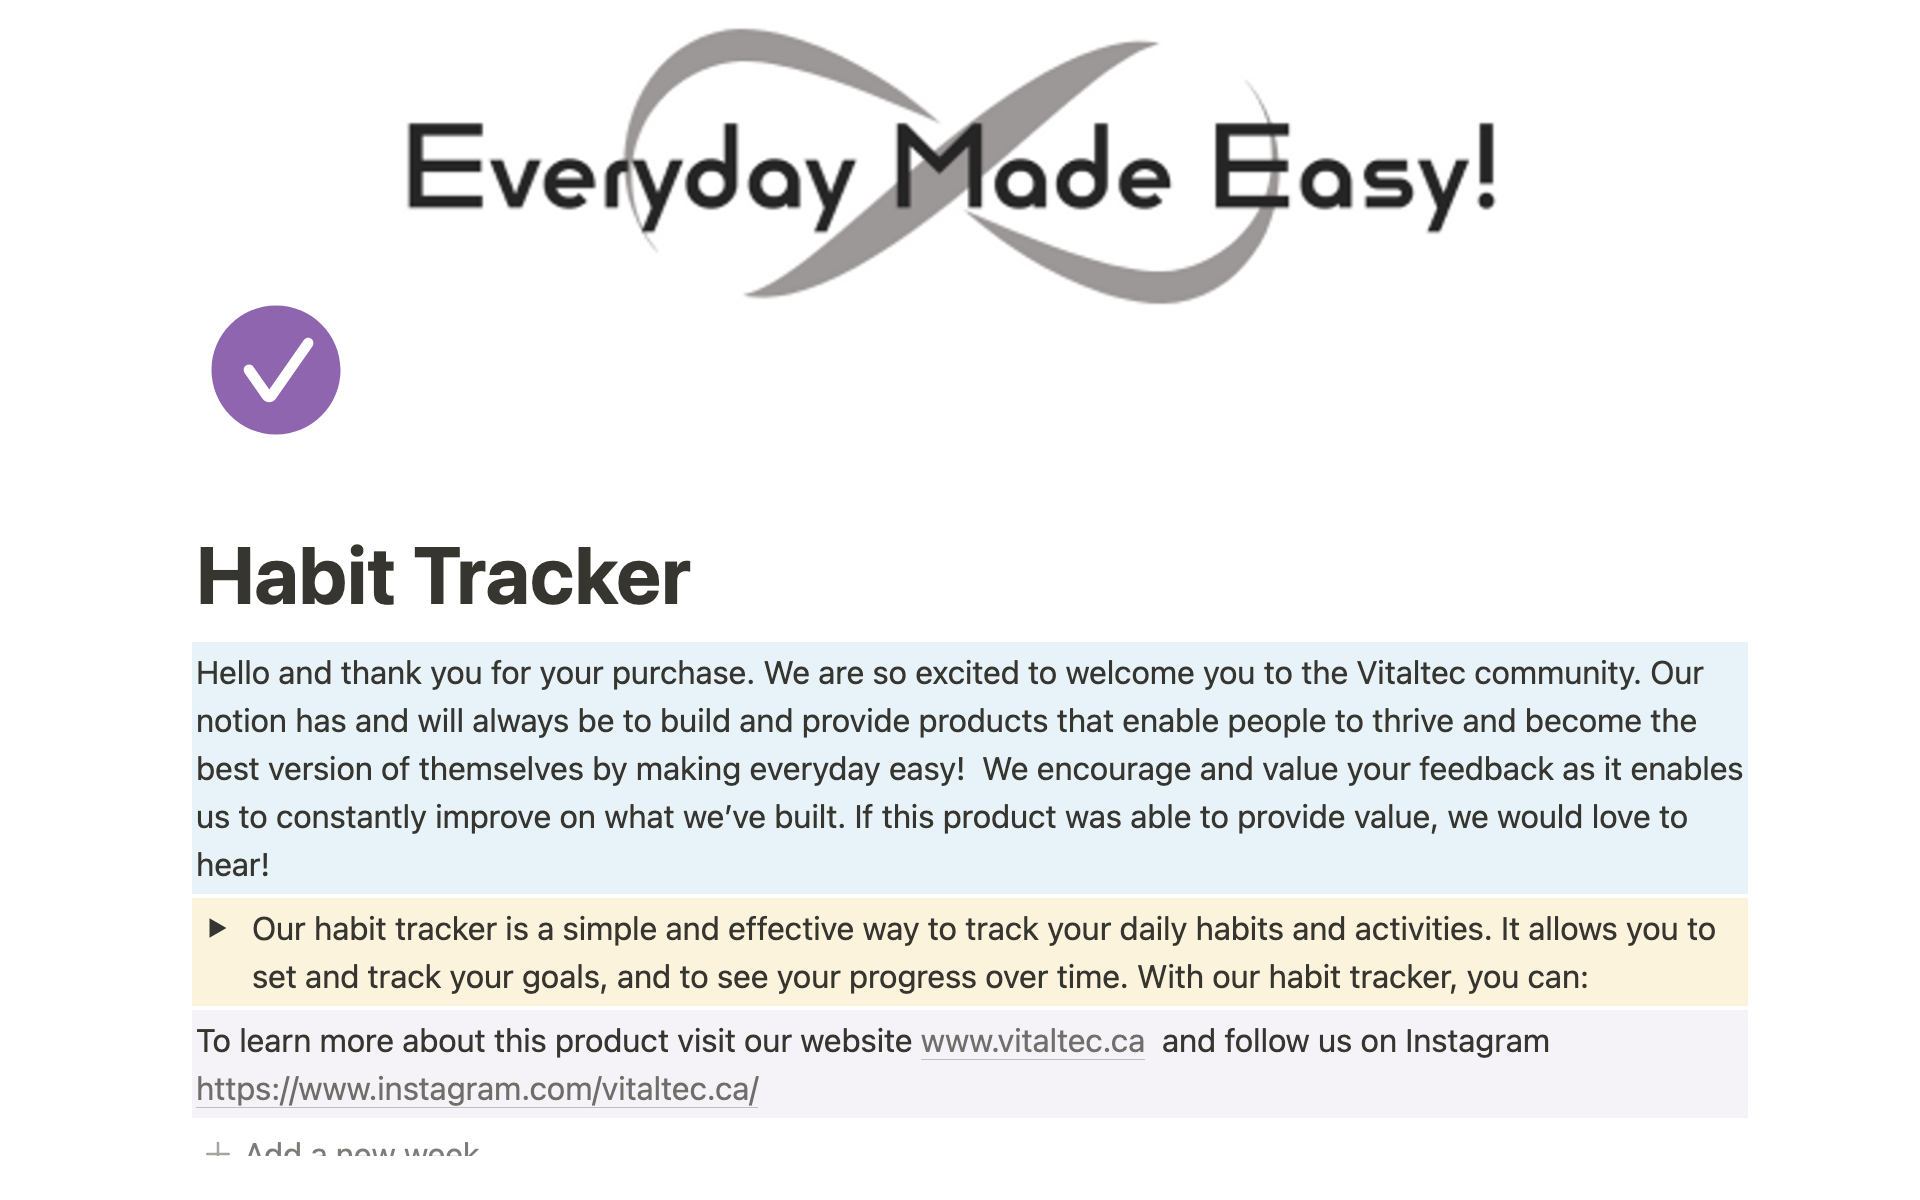 Makes habit tracking simple and easy.